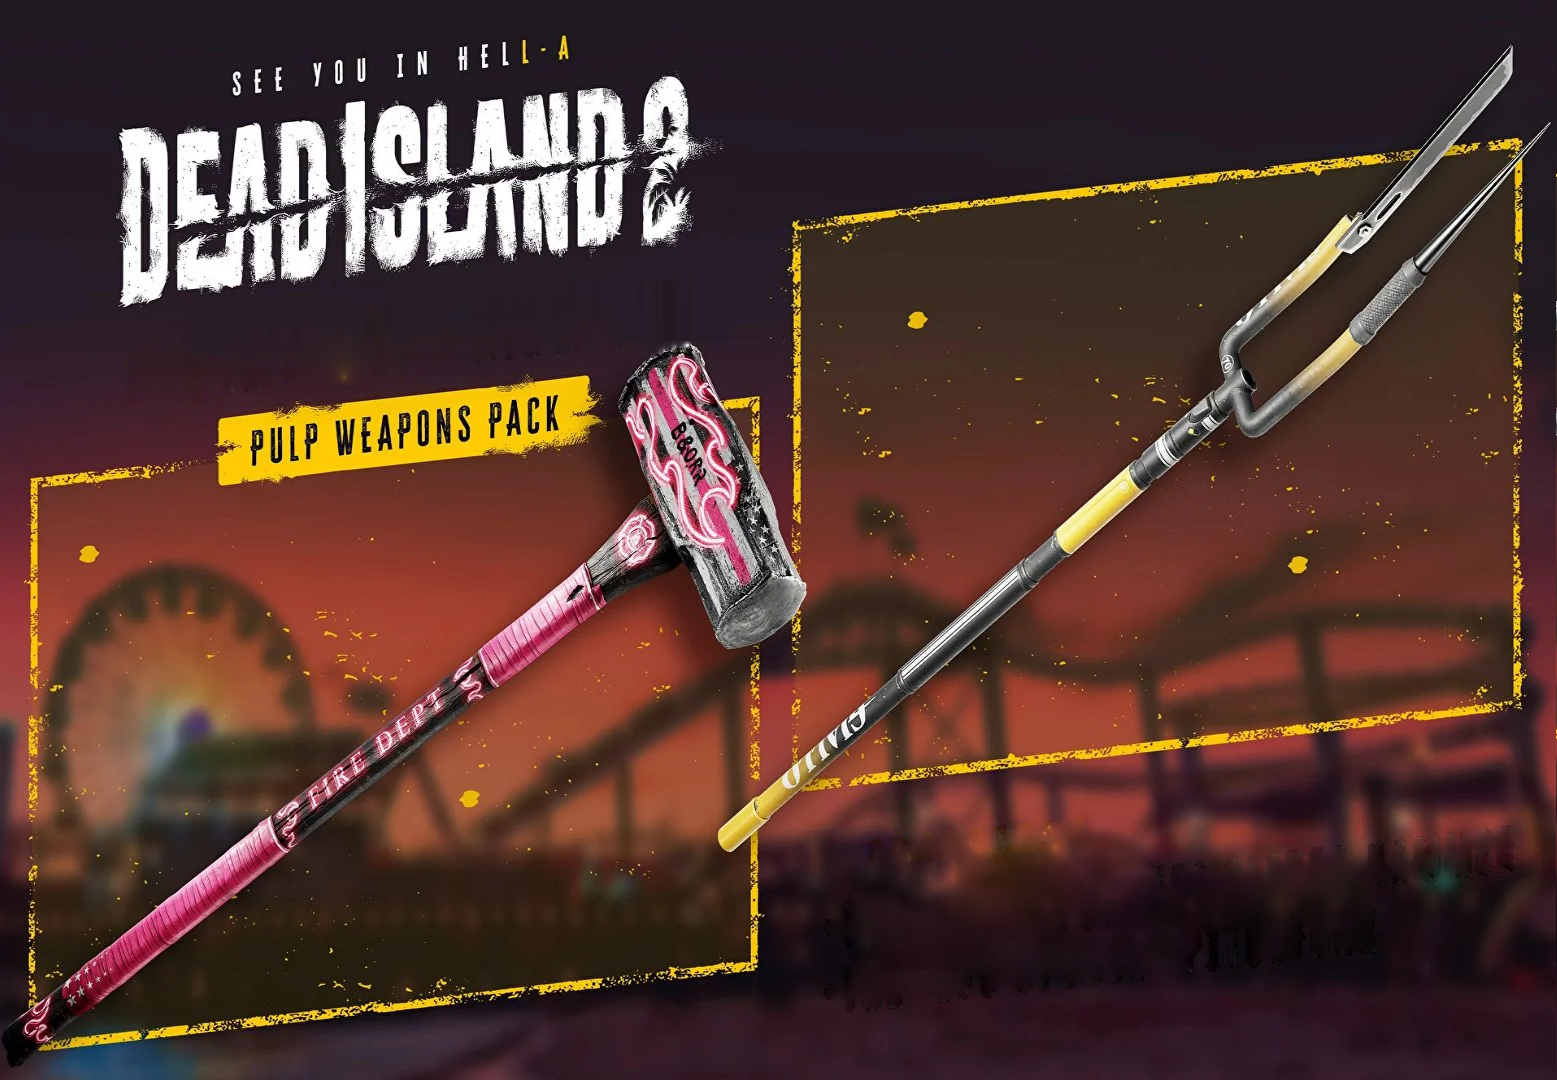 Dead Island 2 Character Pack 2 - Cyber Slayer Amy